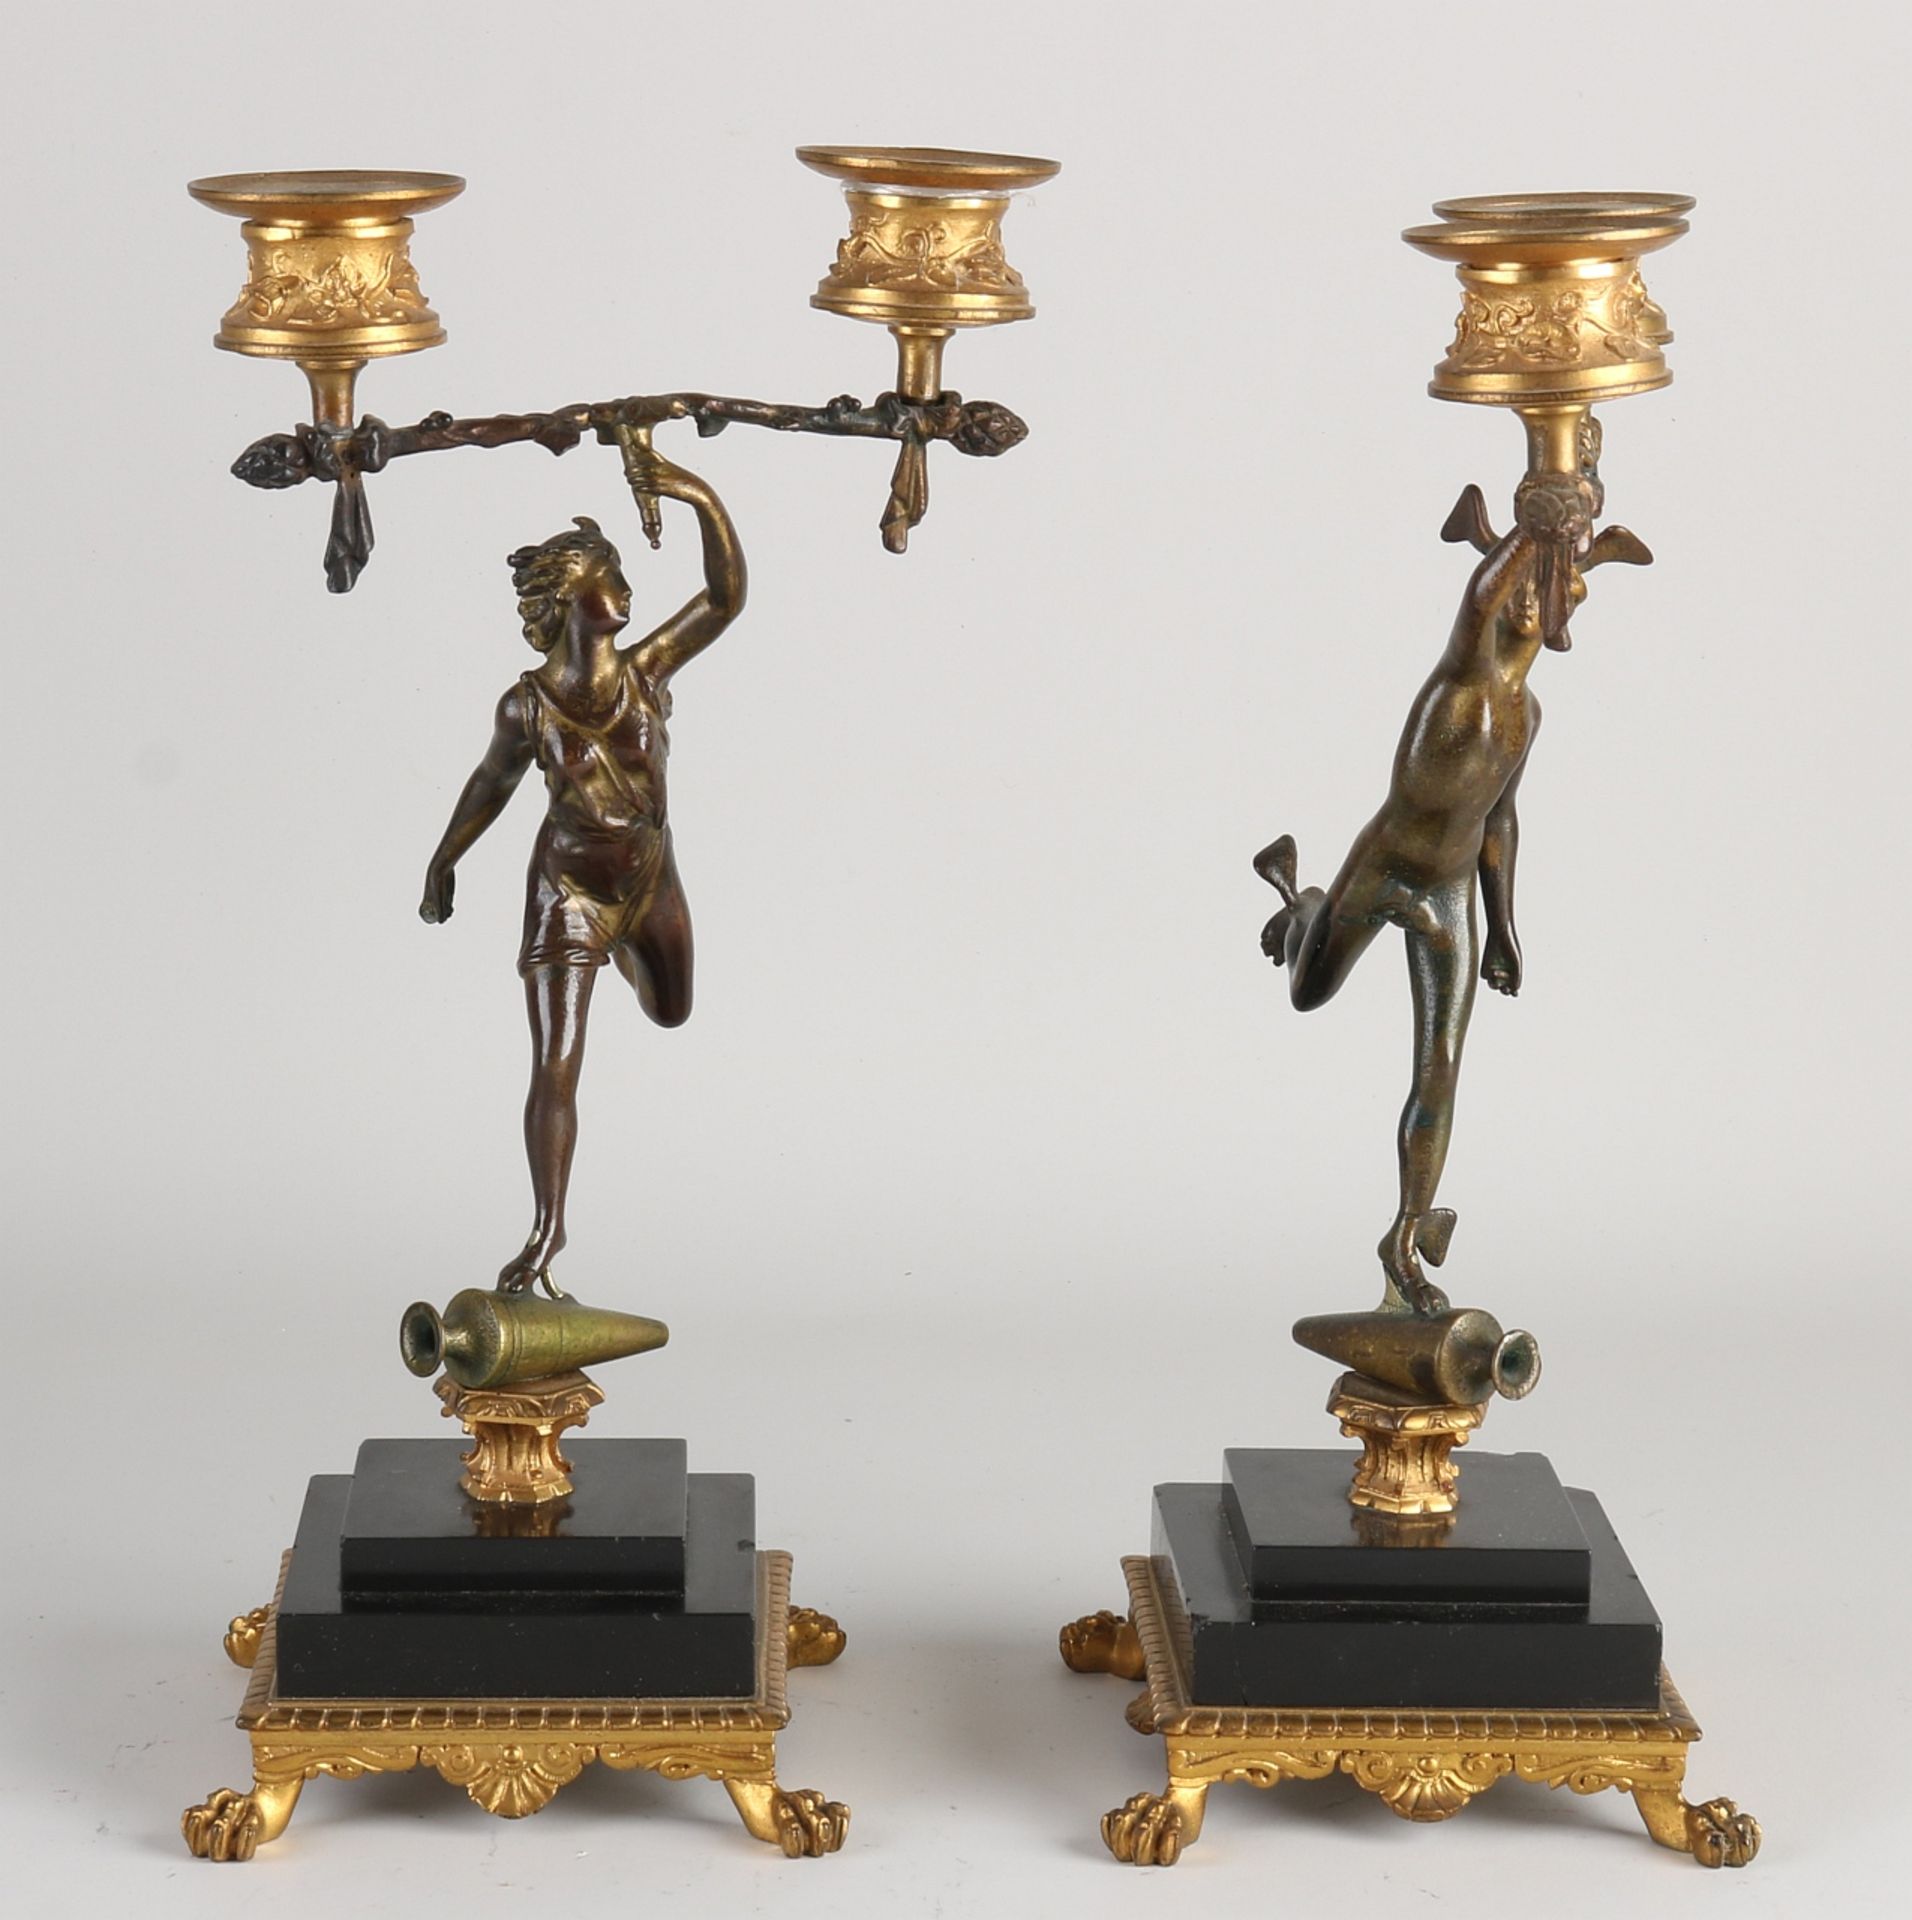 Two French bronze candlesticks, 1860 - Image 2 of 2